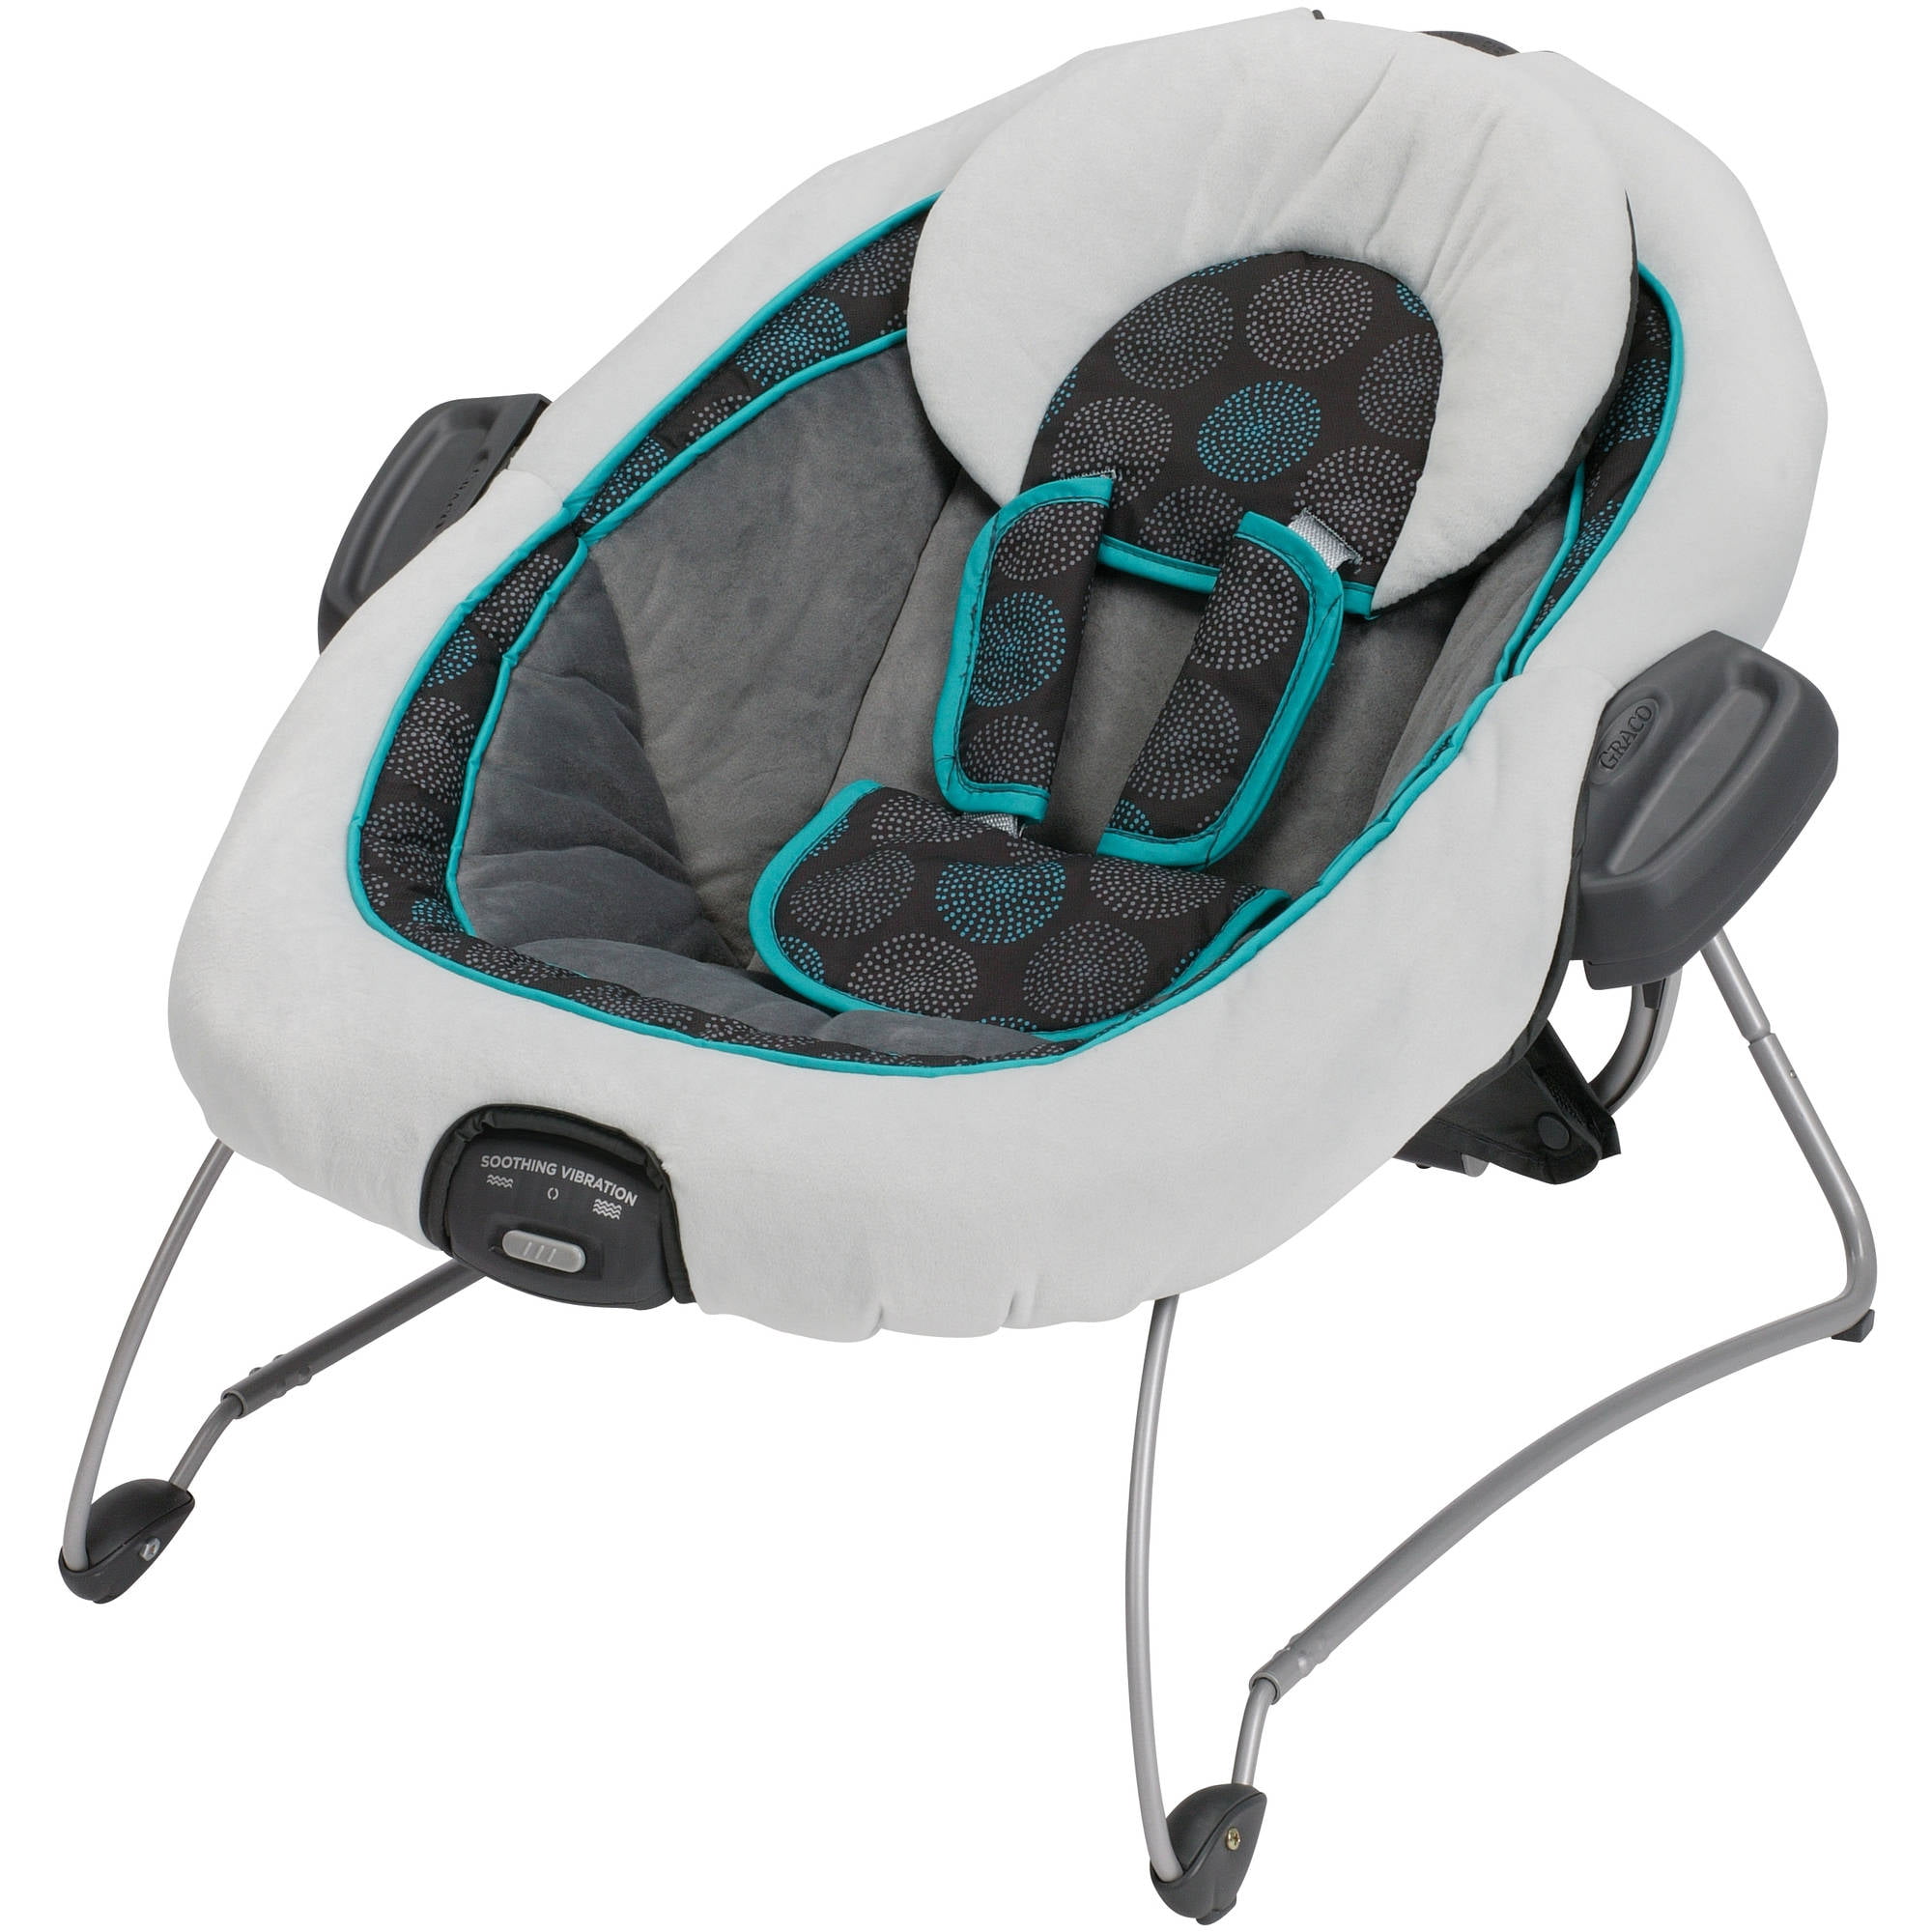 baby bouncer that swings and vibrates